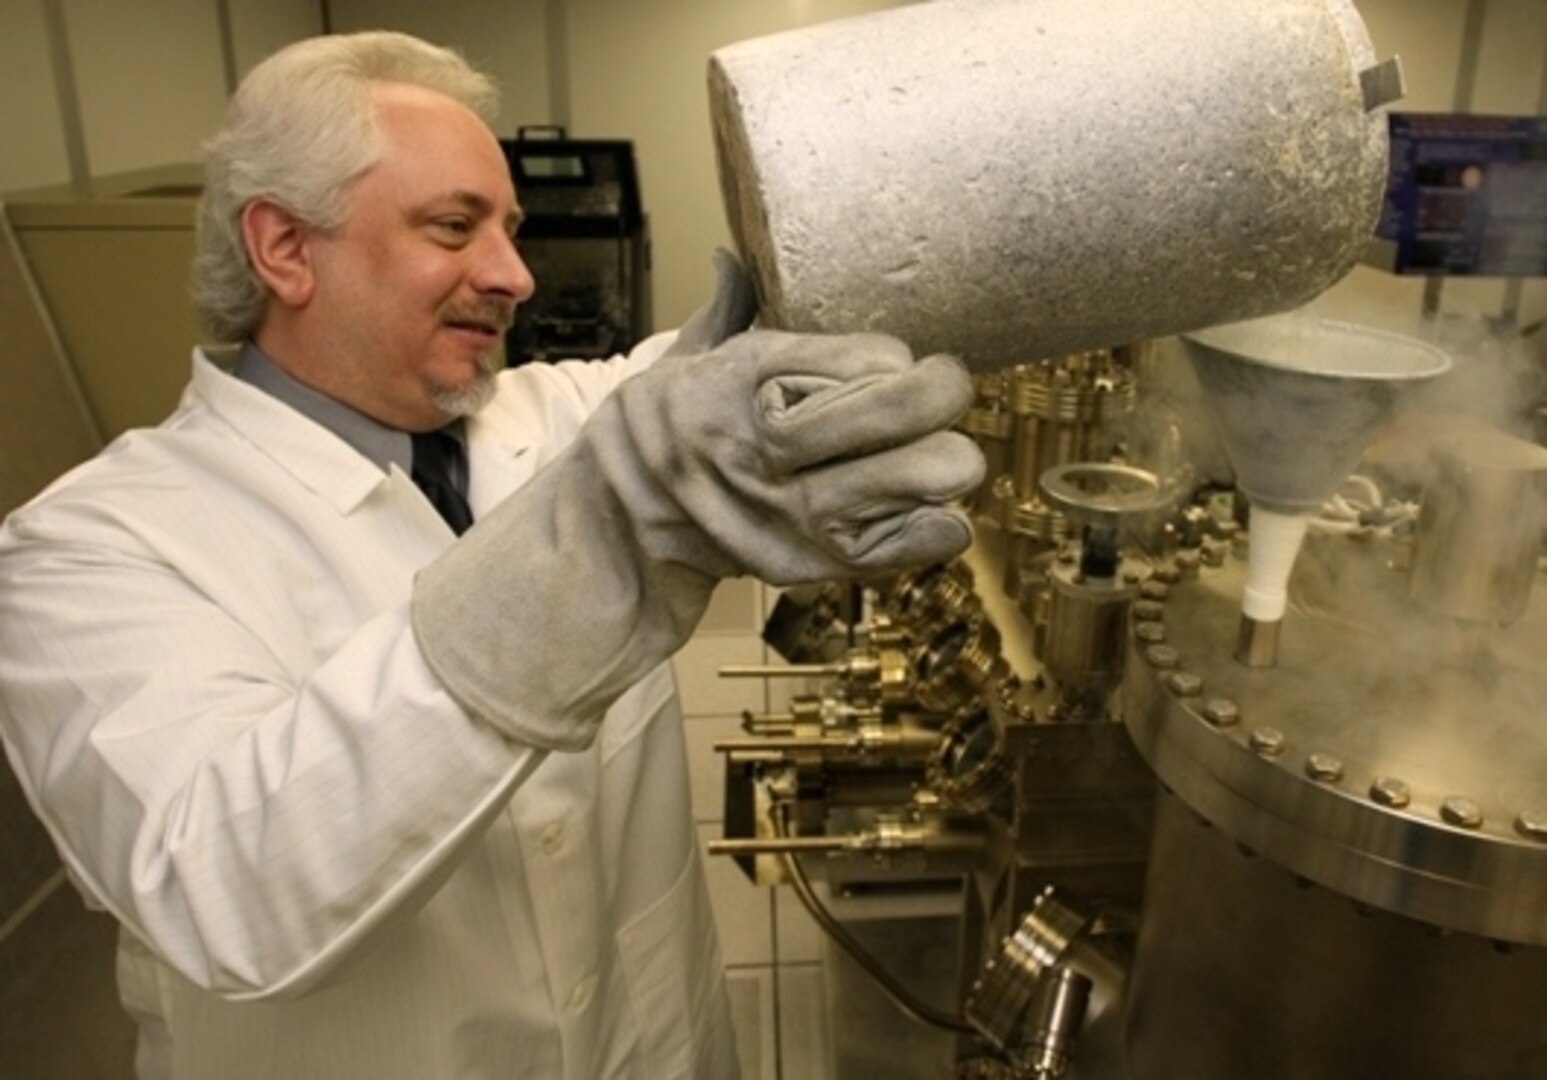 Naval Surface Warfare Center Dahlgren Division (NSWCDD) scientist Dr. Kevin Boulais uses liquid nitrogen in a molecular beam epitaxy system to create photo capacitors for light guide film applications.